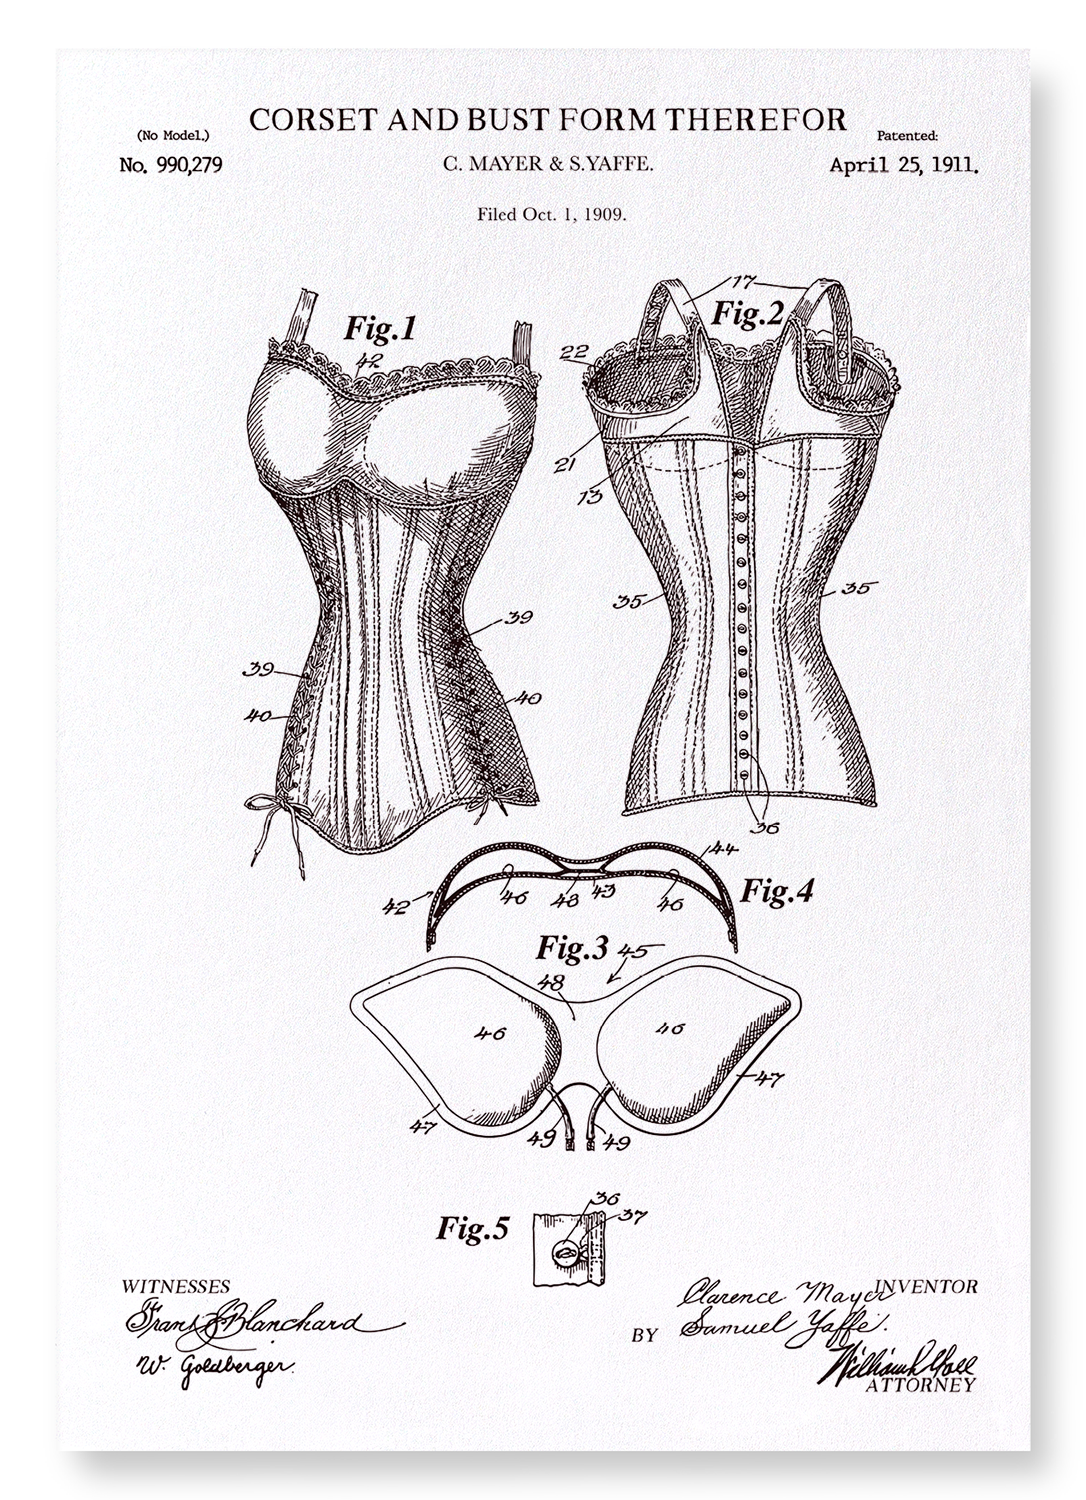 PATENT OF CORSET AND BUST (1911): Patent Art Print